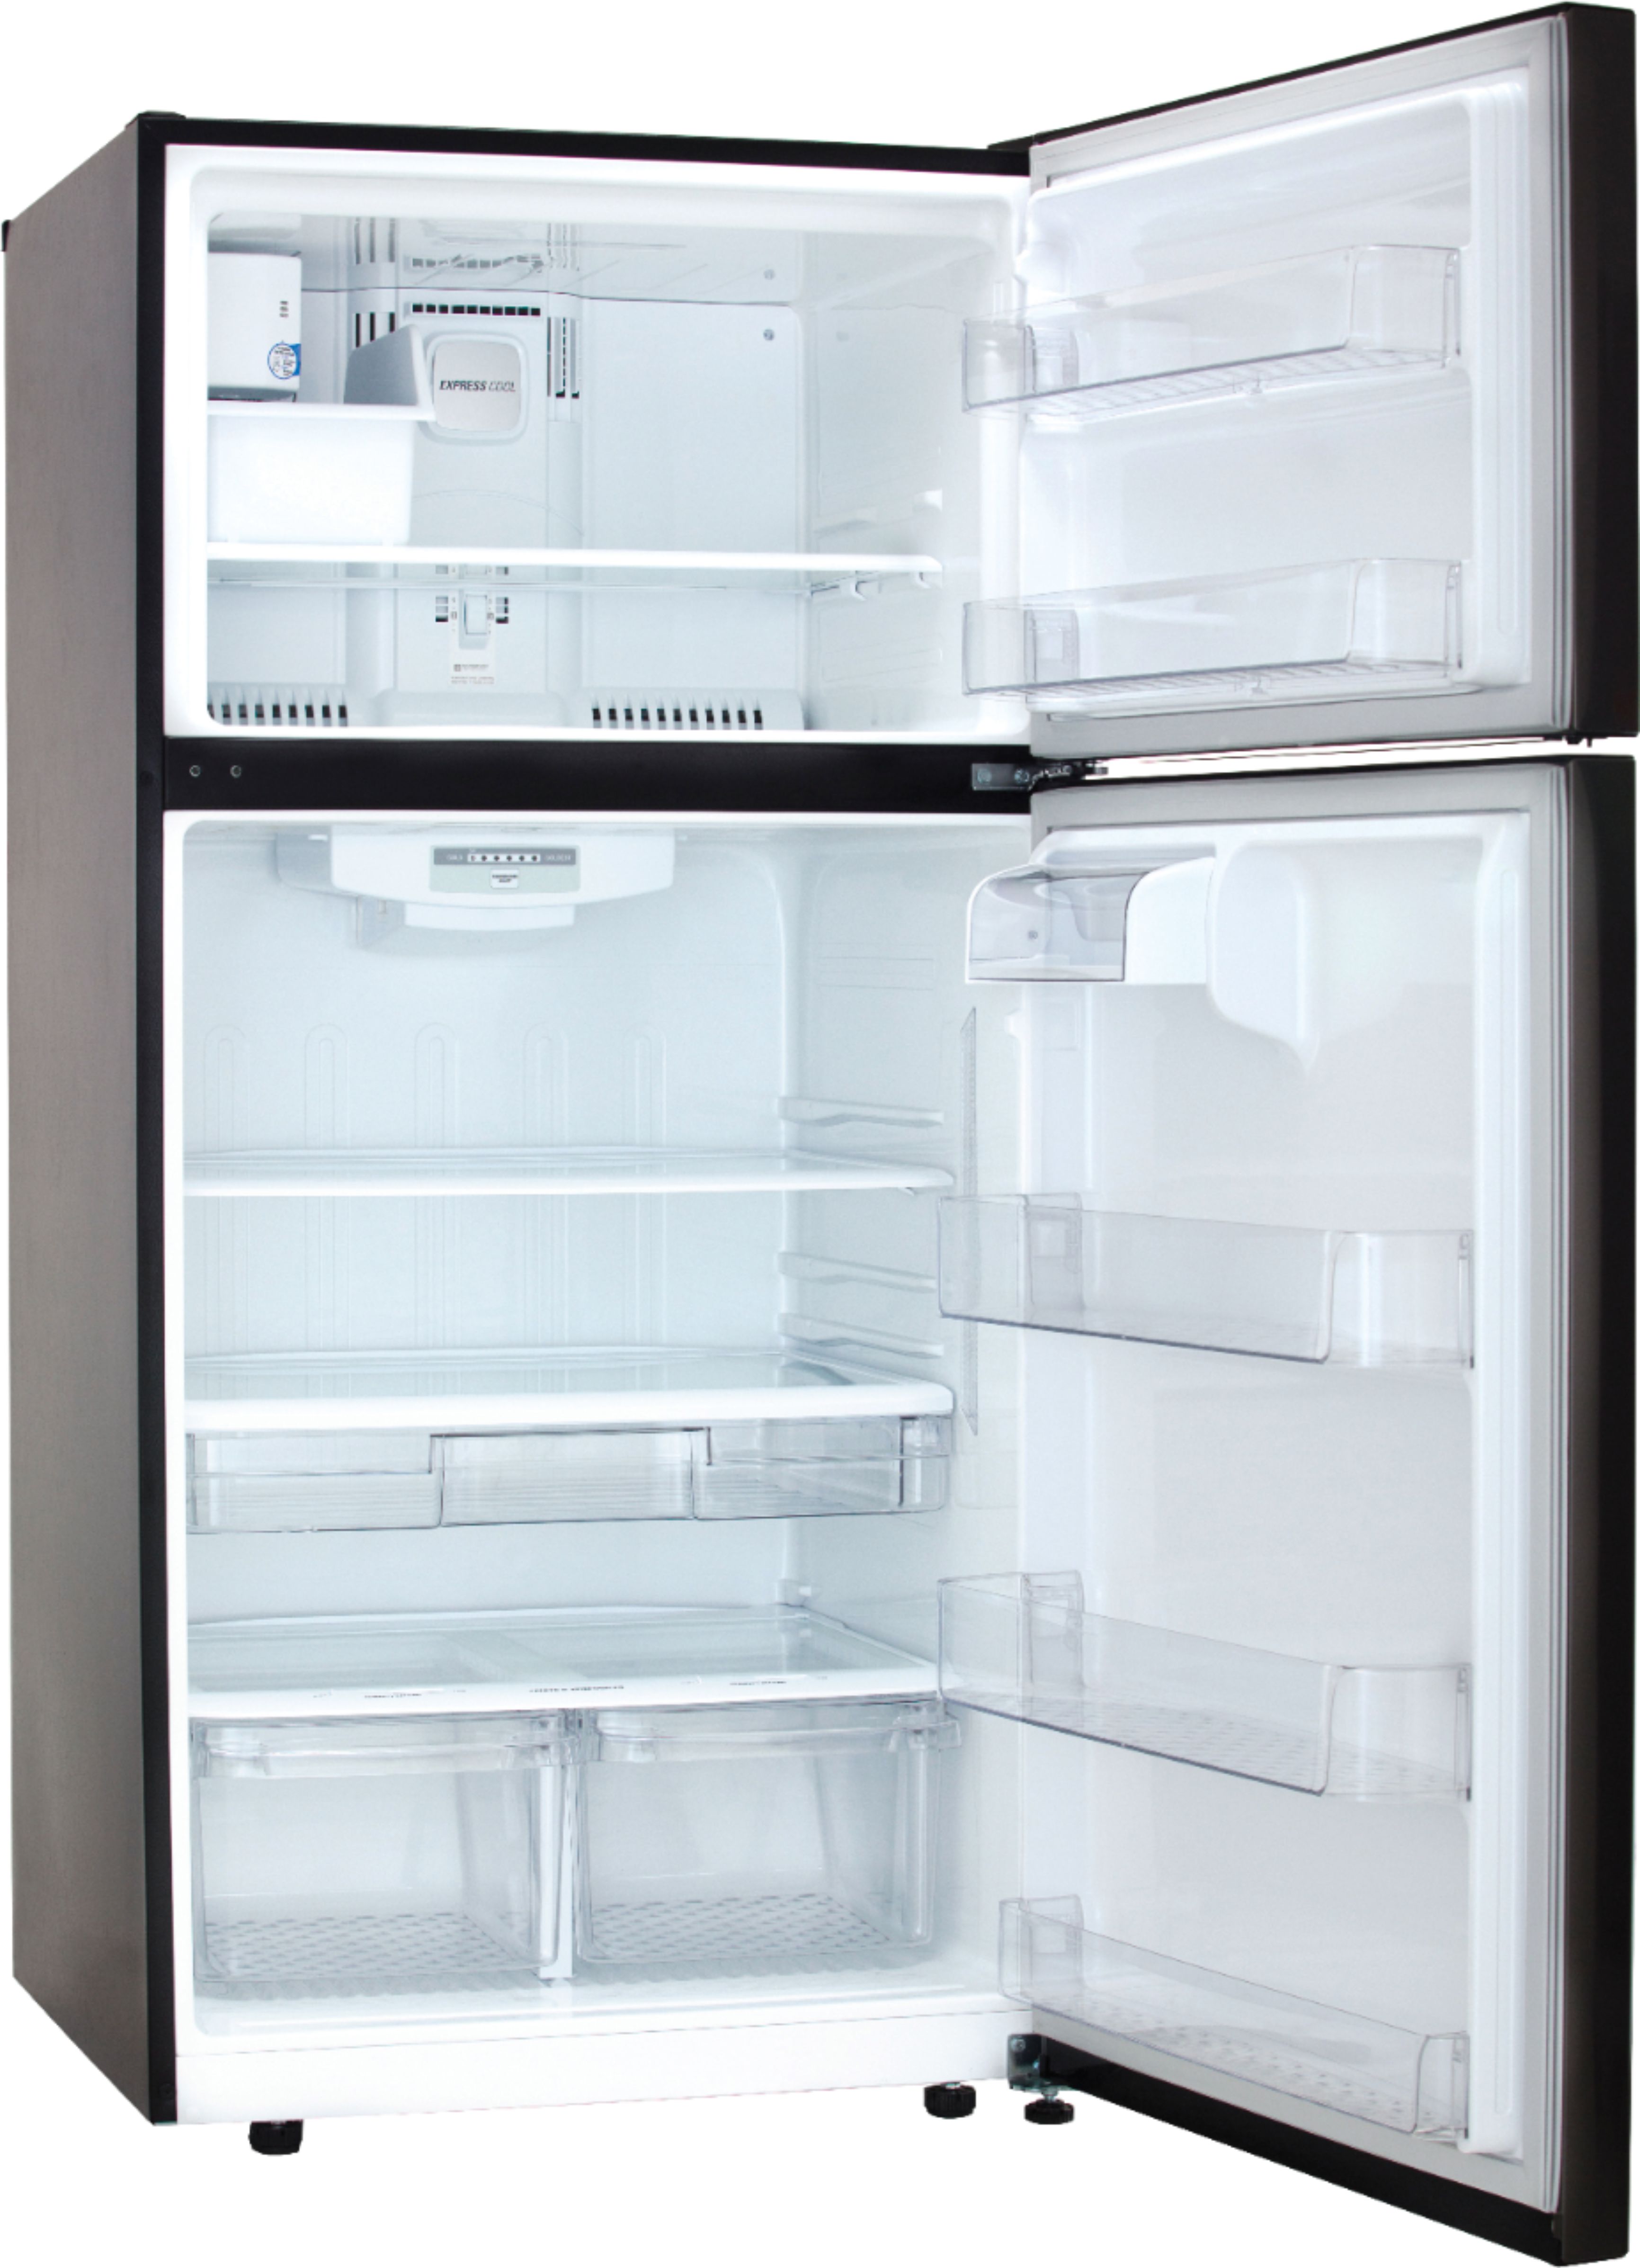 Questions and Answers LG 23.8 Cu. Ft. TopFreezer Refrigerator with